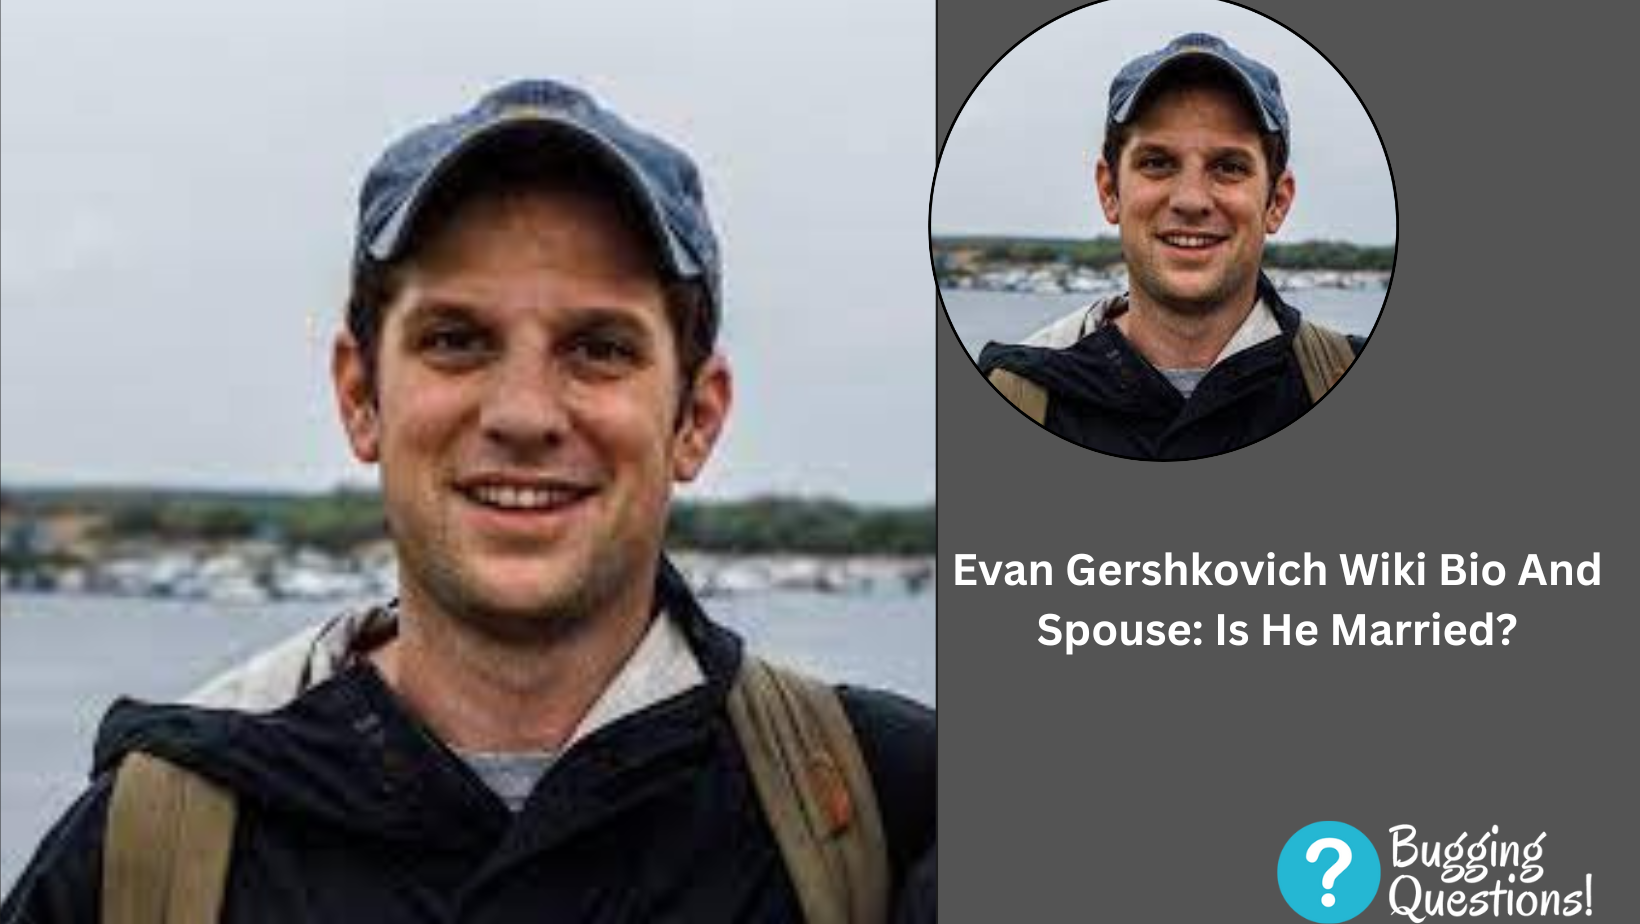 Evan Gershkovich Wiki Bio And Spouse: Is He Married?